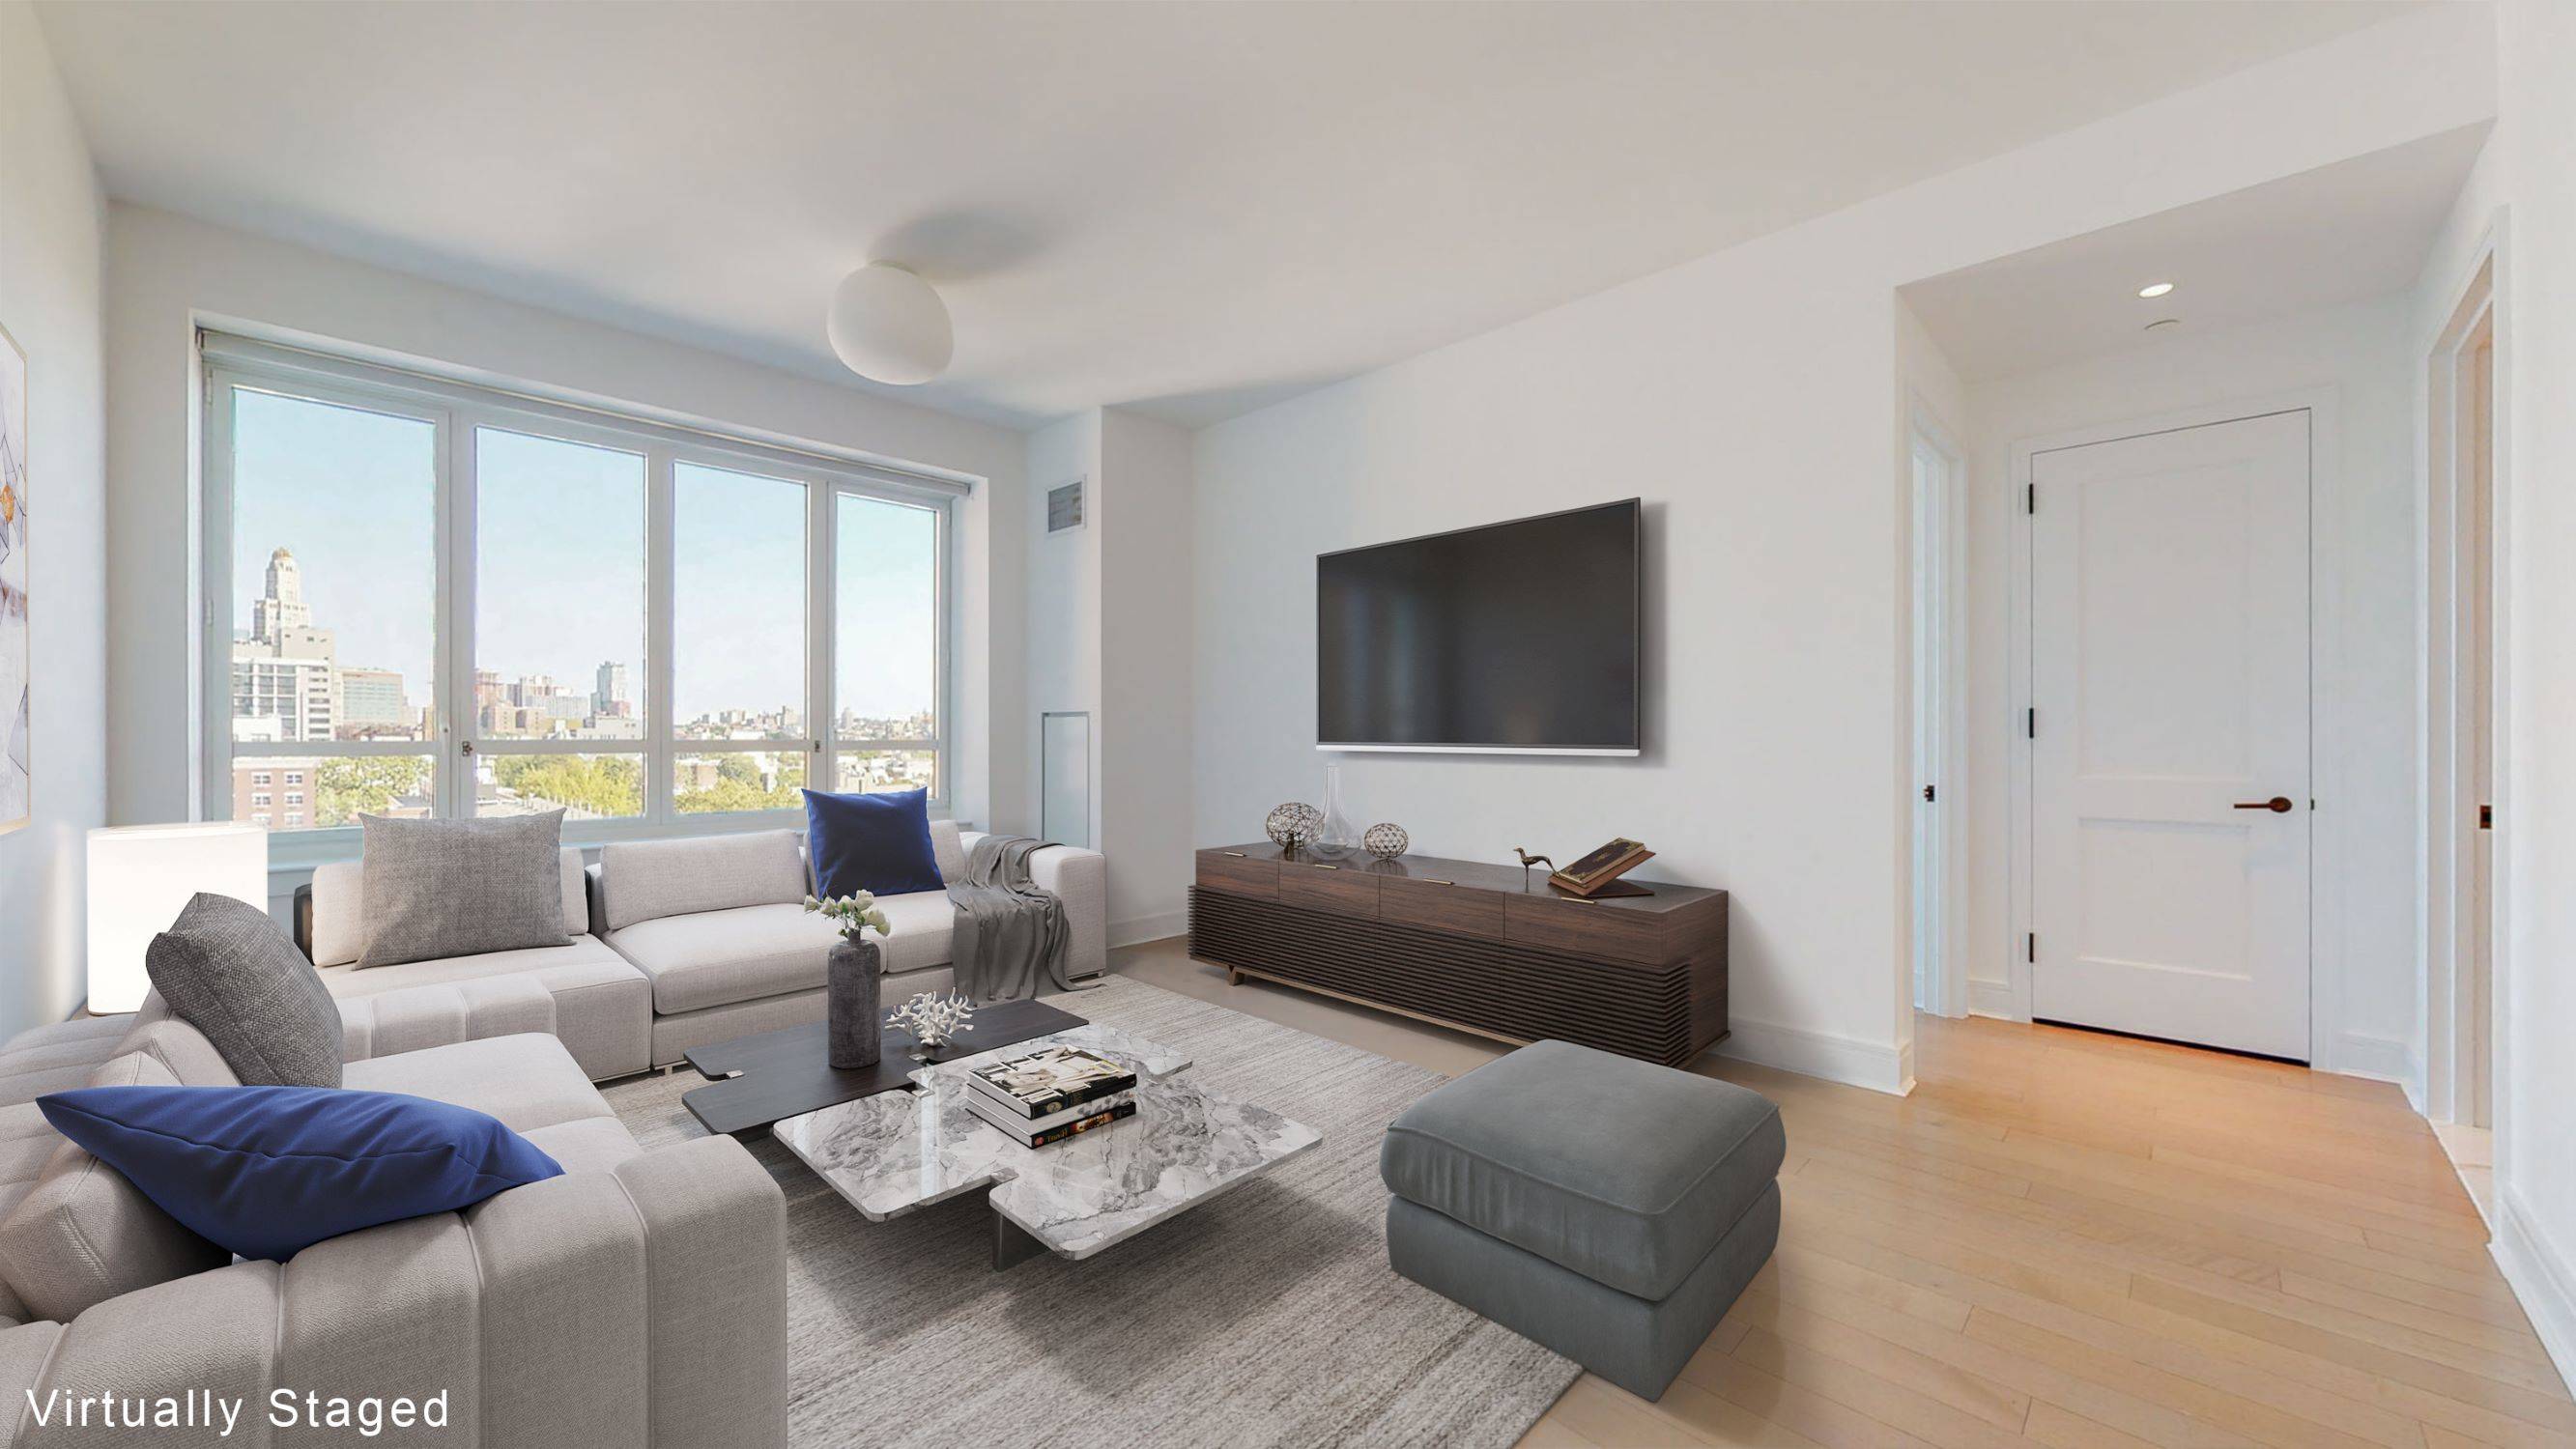 Apartment 805 is the latest offering at 265 State Street, Boerum Hill's premier luxury condominium.